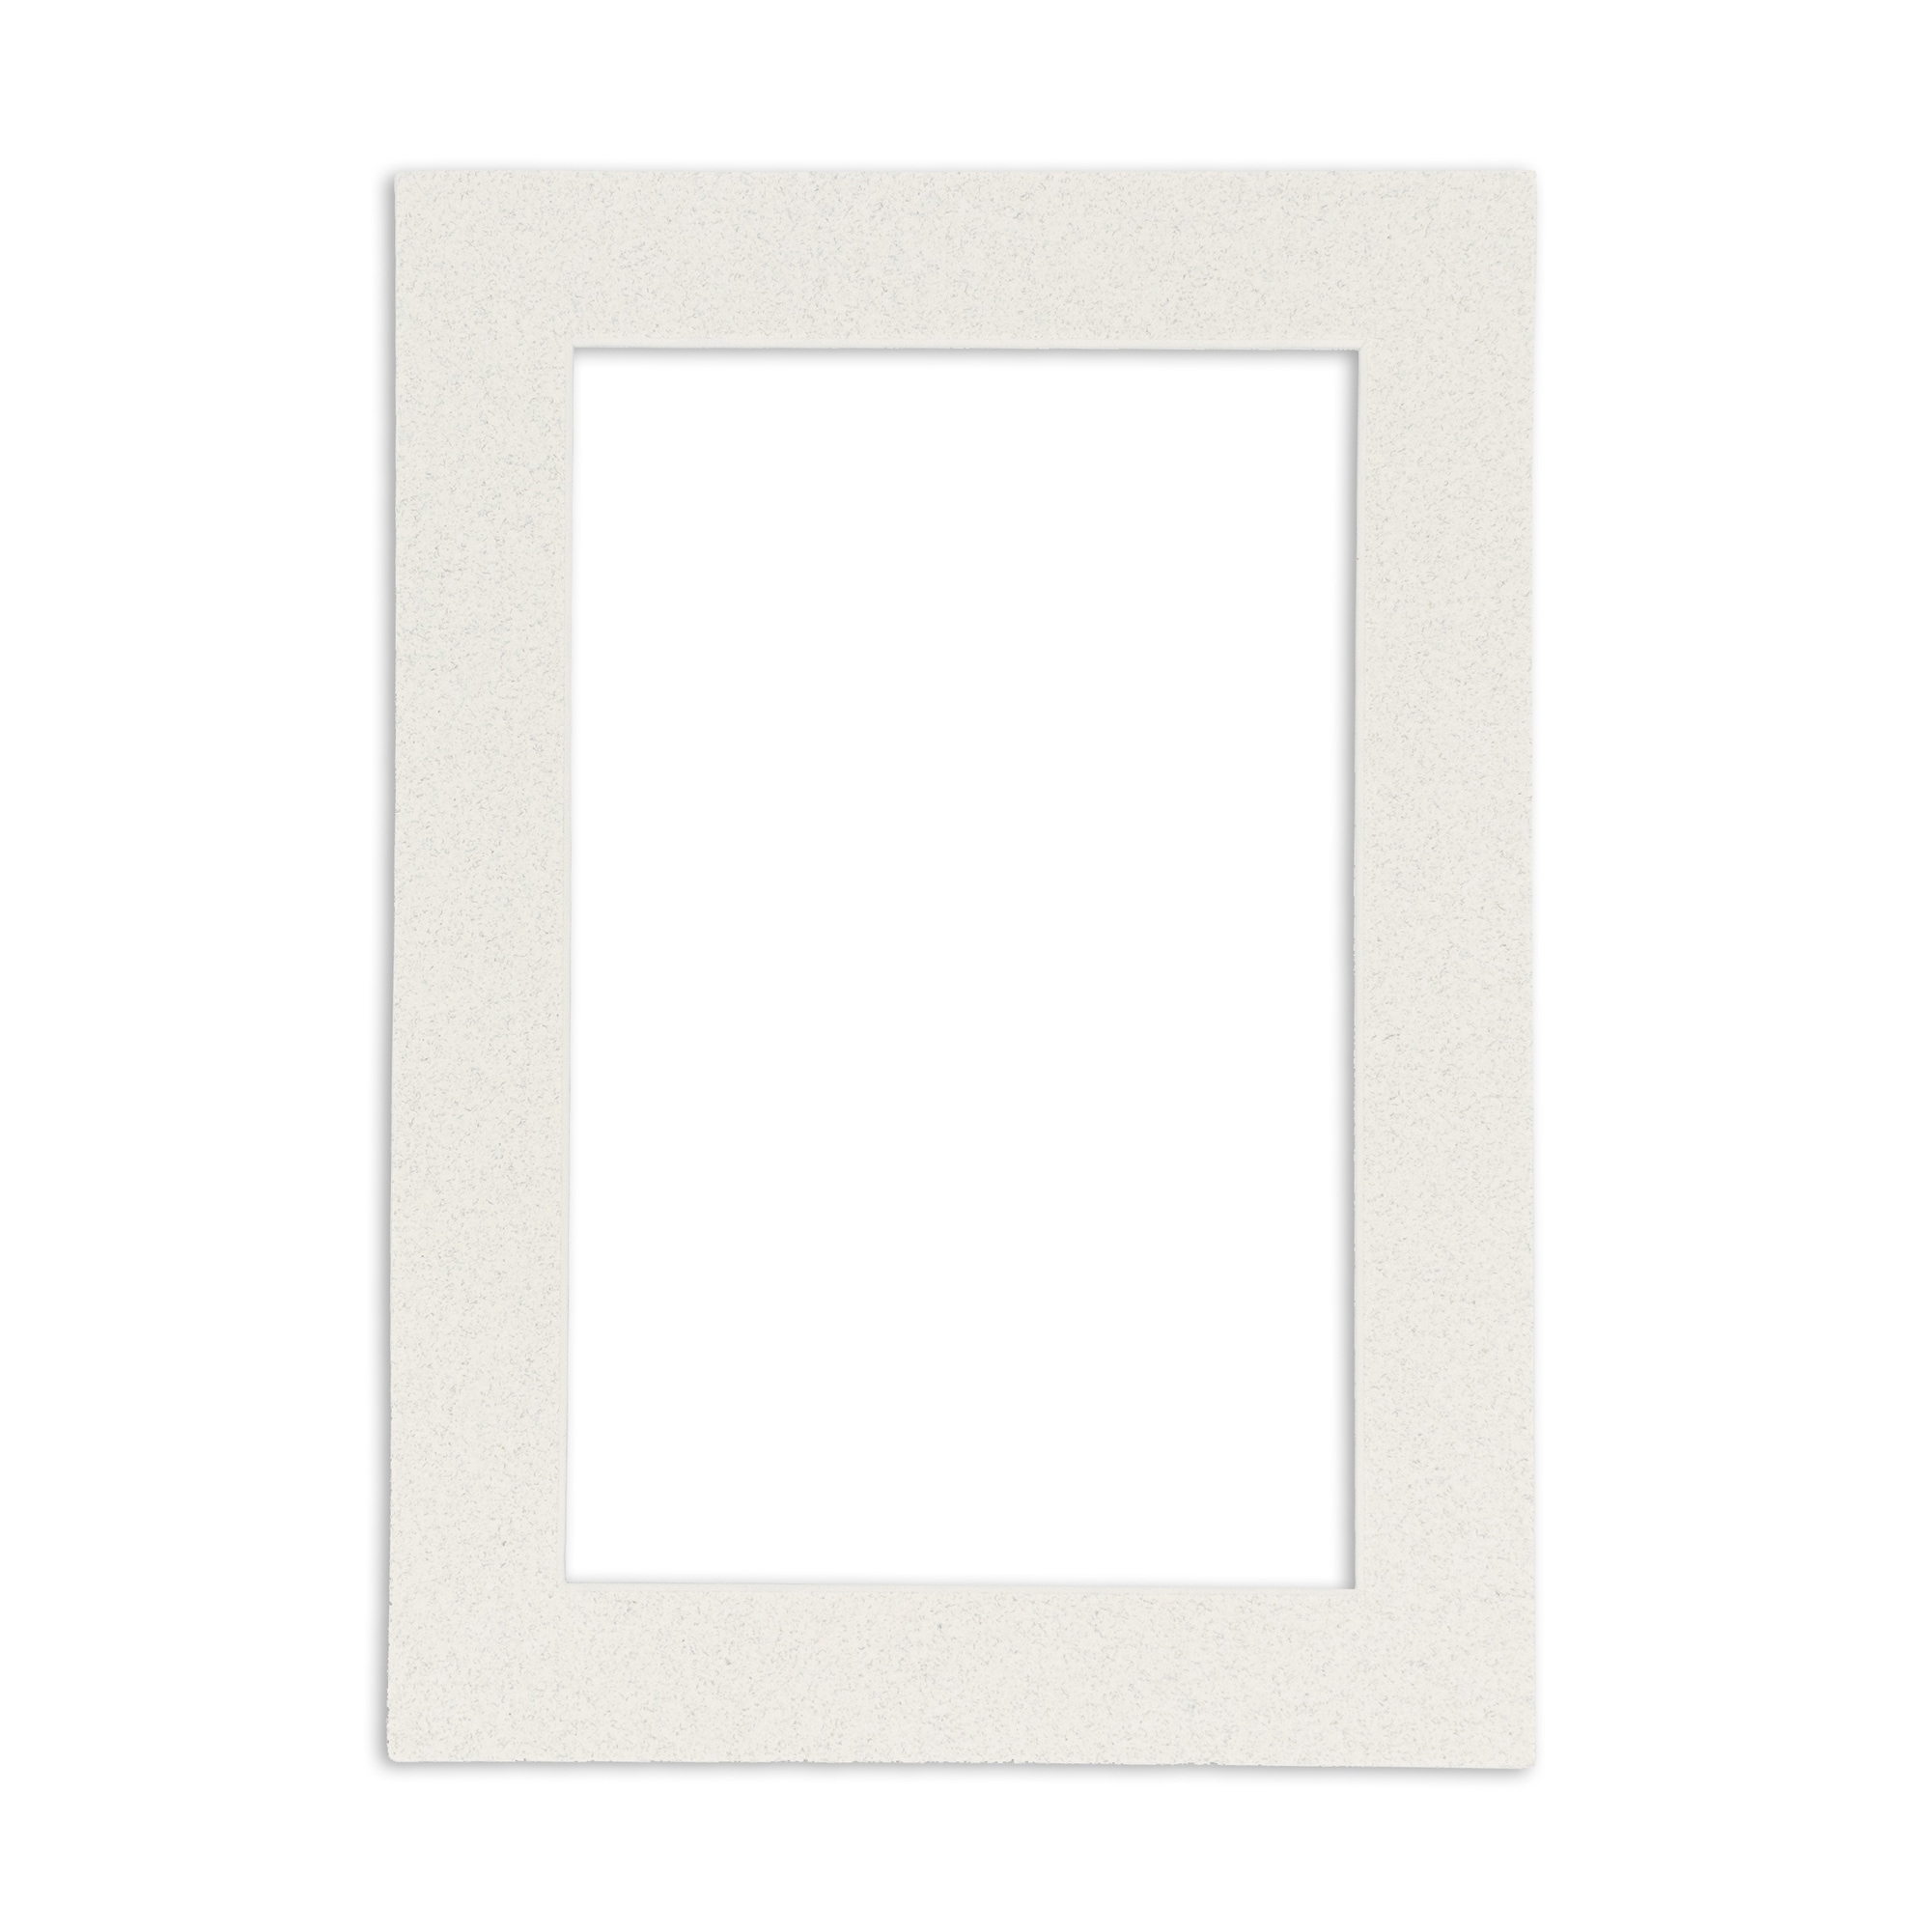 20x30 Mat Bevel Cut for 18x27 Photos - Acid Free Oyster Shell White Precut  Matboard - For Pictures, Photos, Framing - On Sale - Bed Bath & Beyond -  38492317